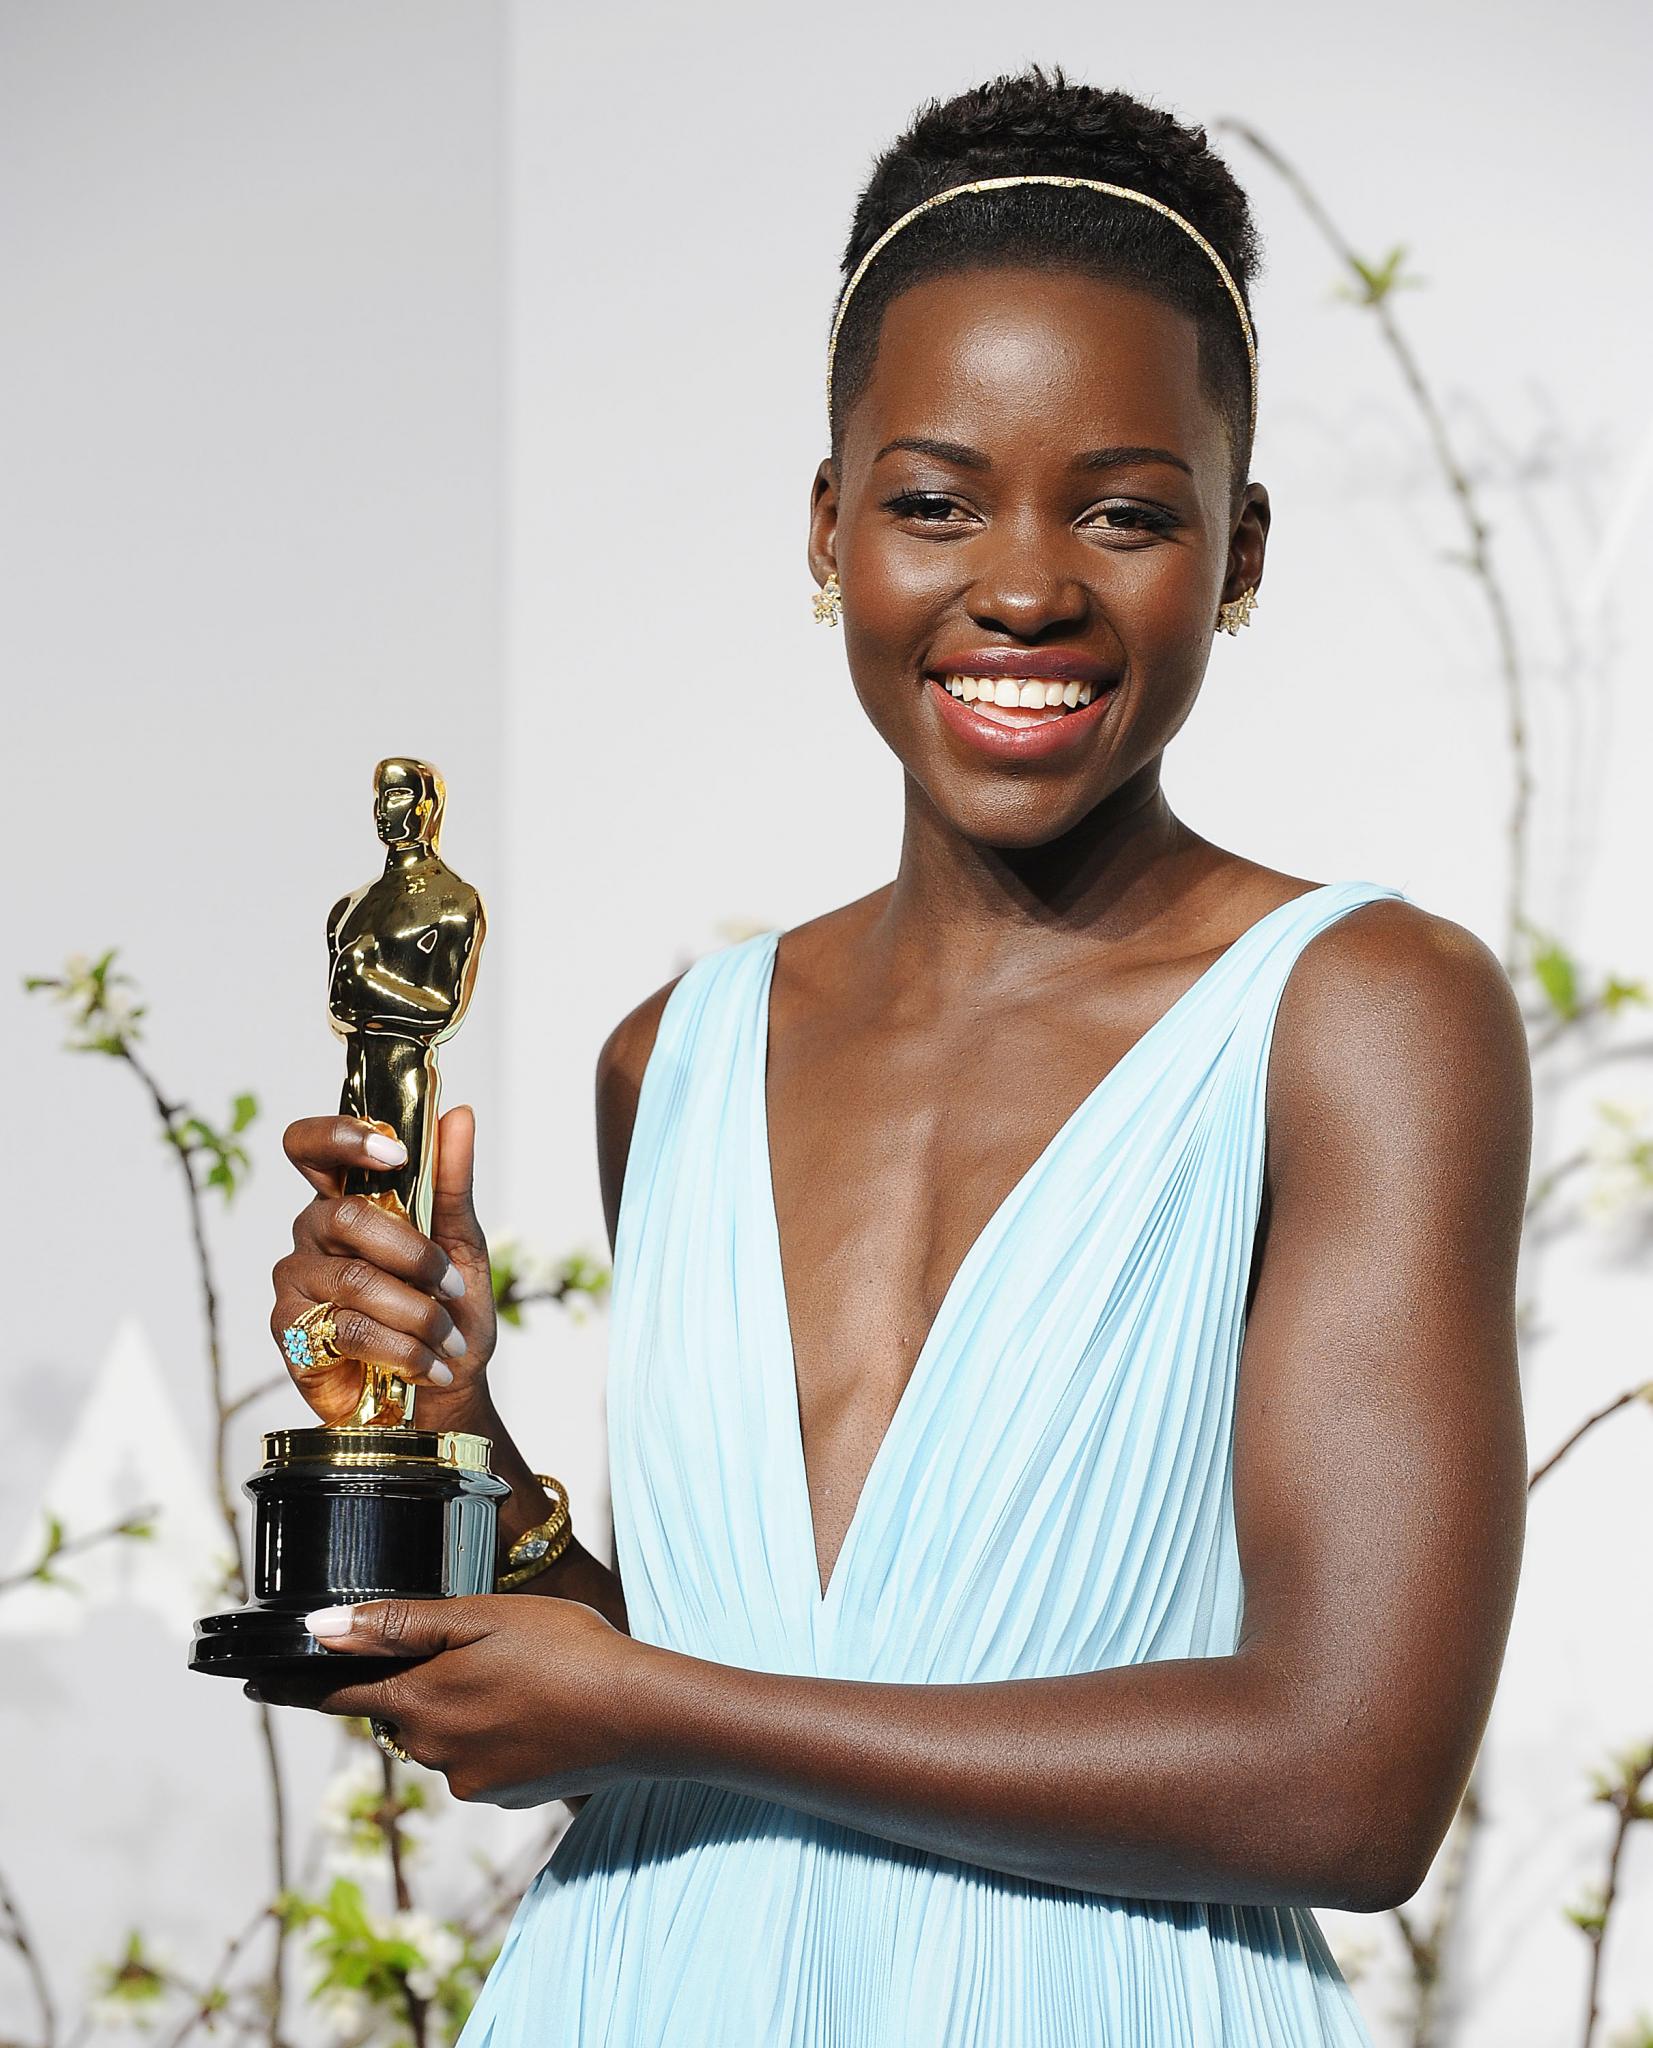 What's Your Favorite Oscars Moment?
